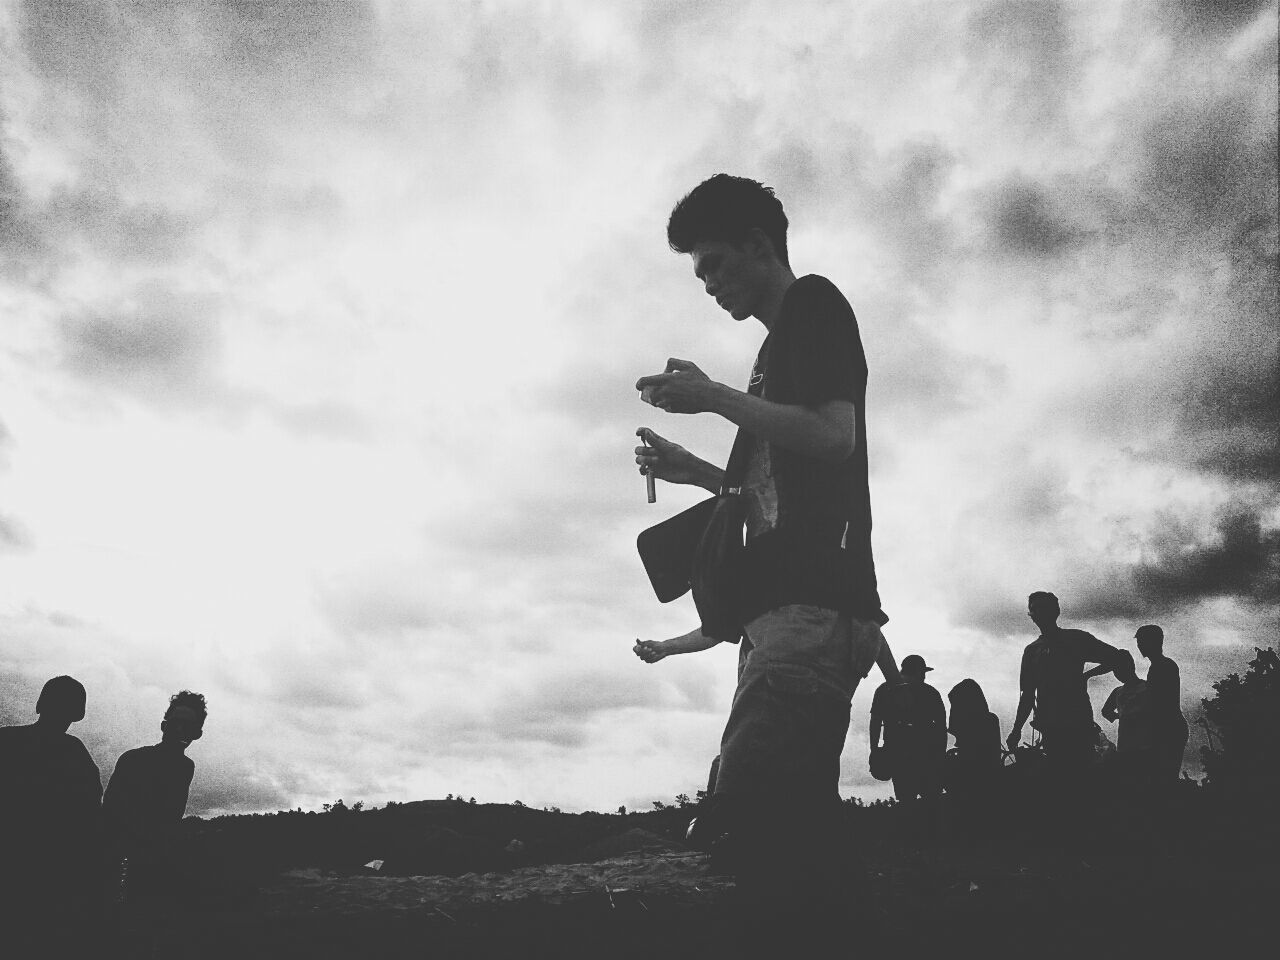 sky, lifestyles, leisure activity, men, silhouette, togetherness, cloud - sky, low angle view, bonding, cloudy, standing, person, childhood, boys, love, sitting, friendship, full length